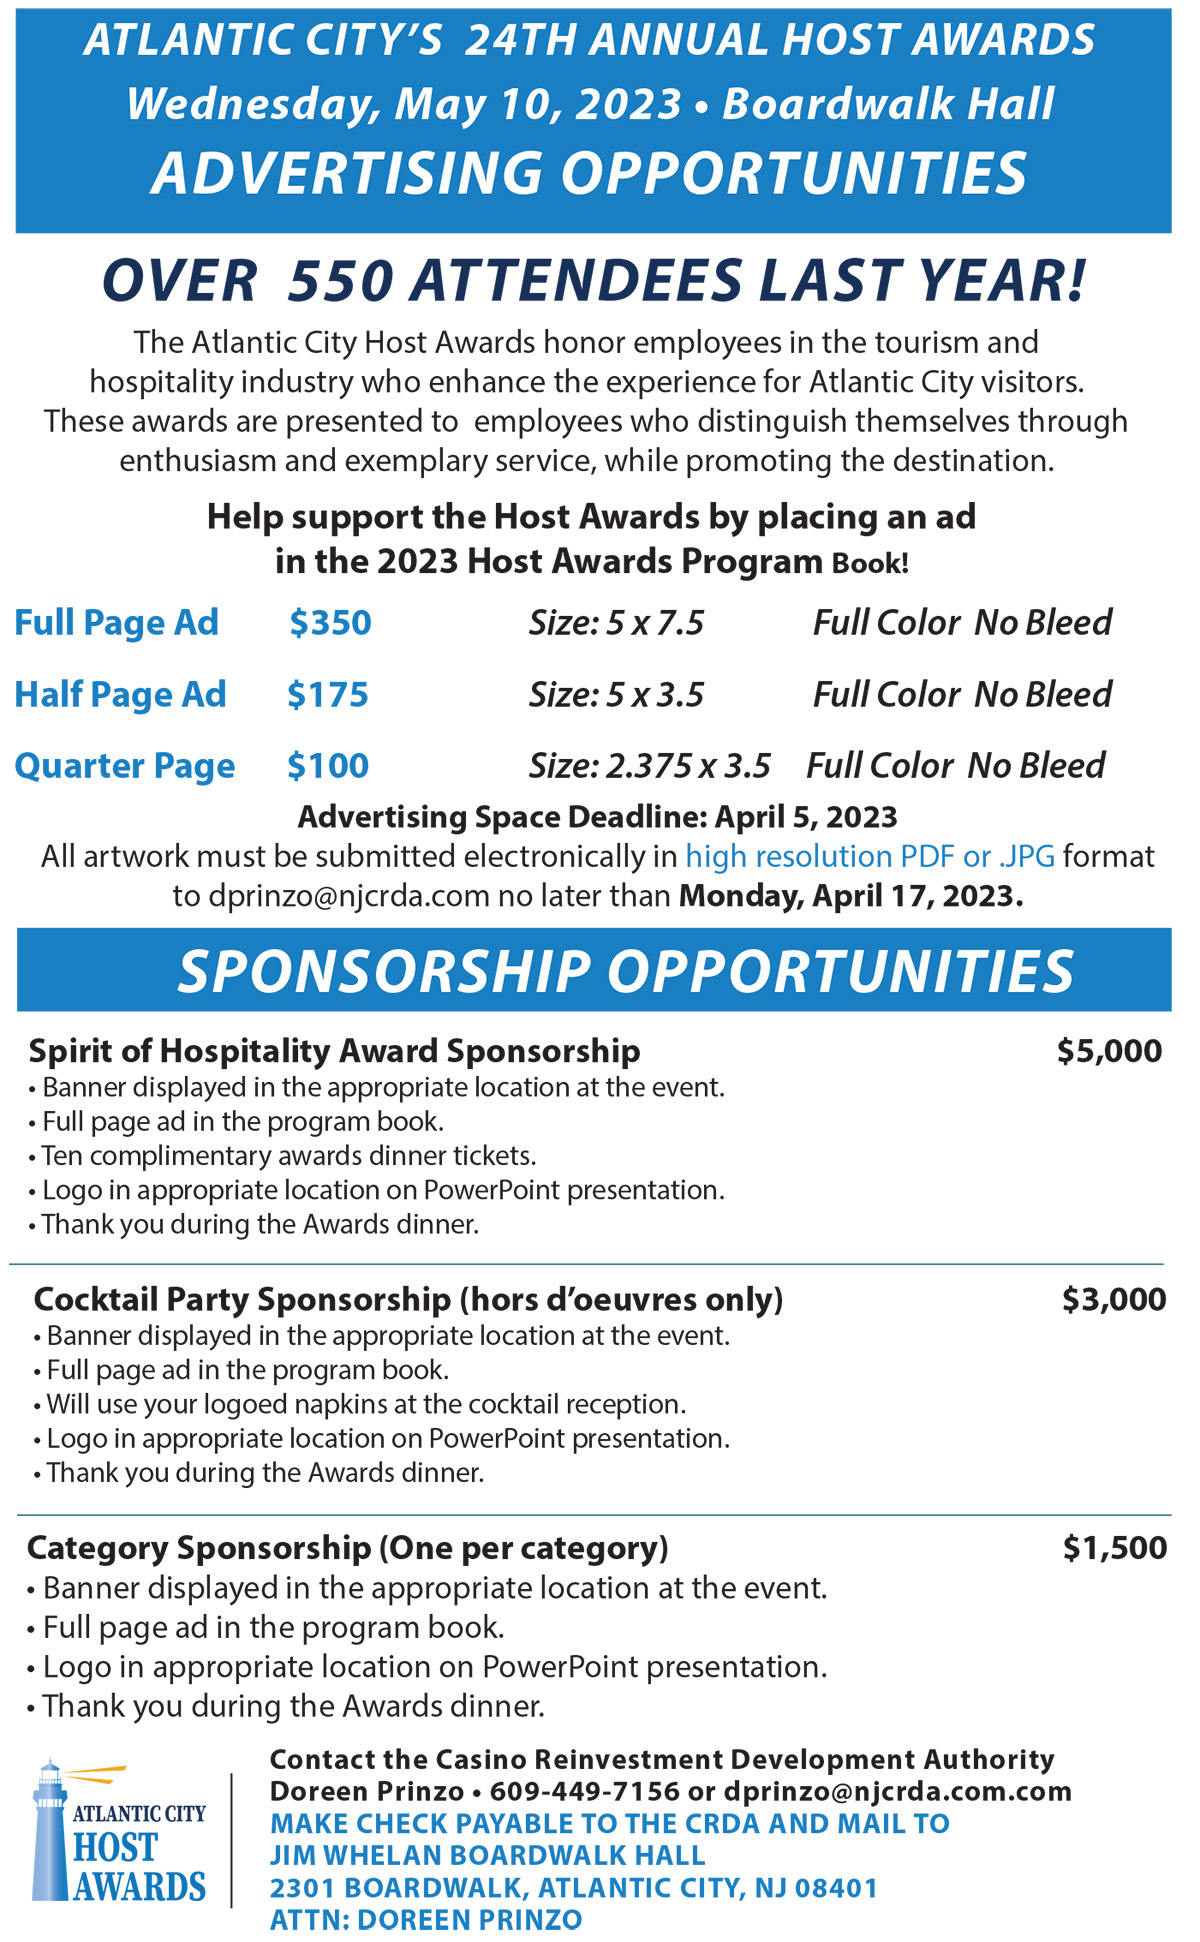 Host Awards Sponsorship Opportunities Information - Download PDF for accessible version.